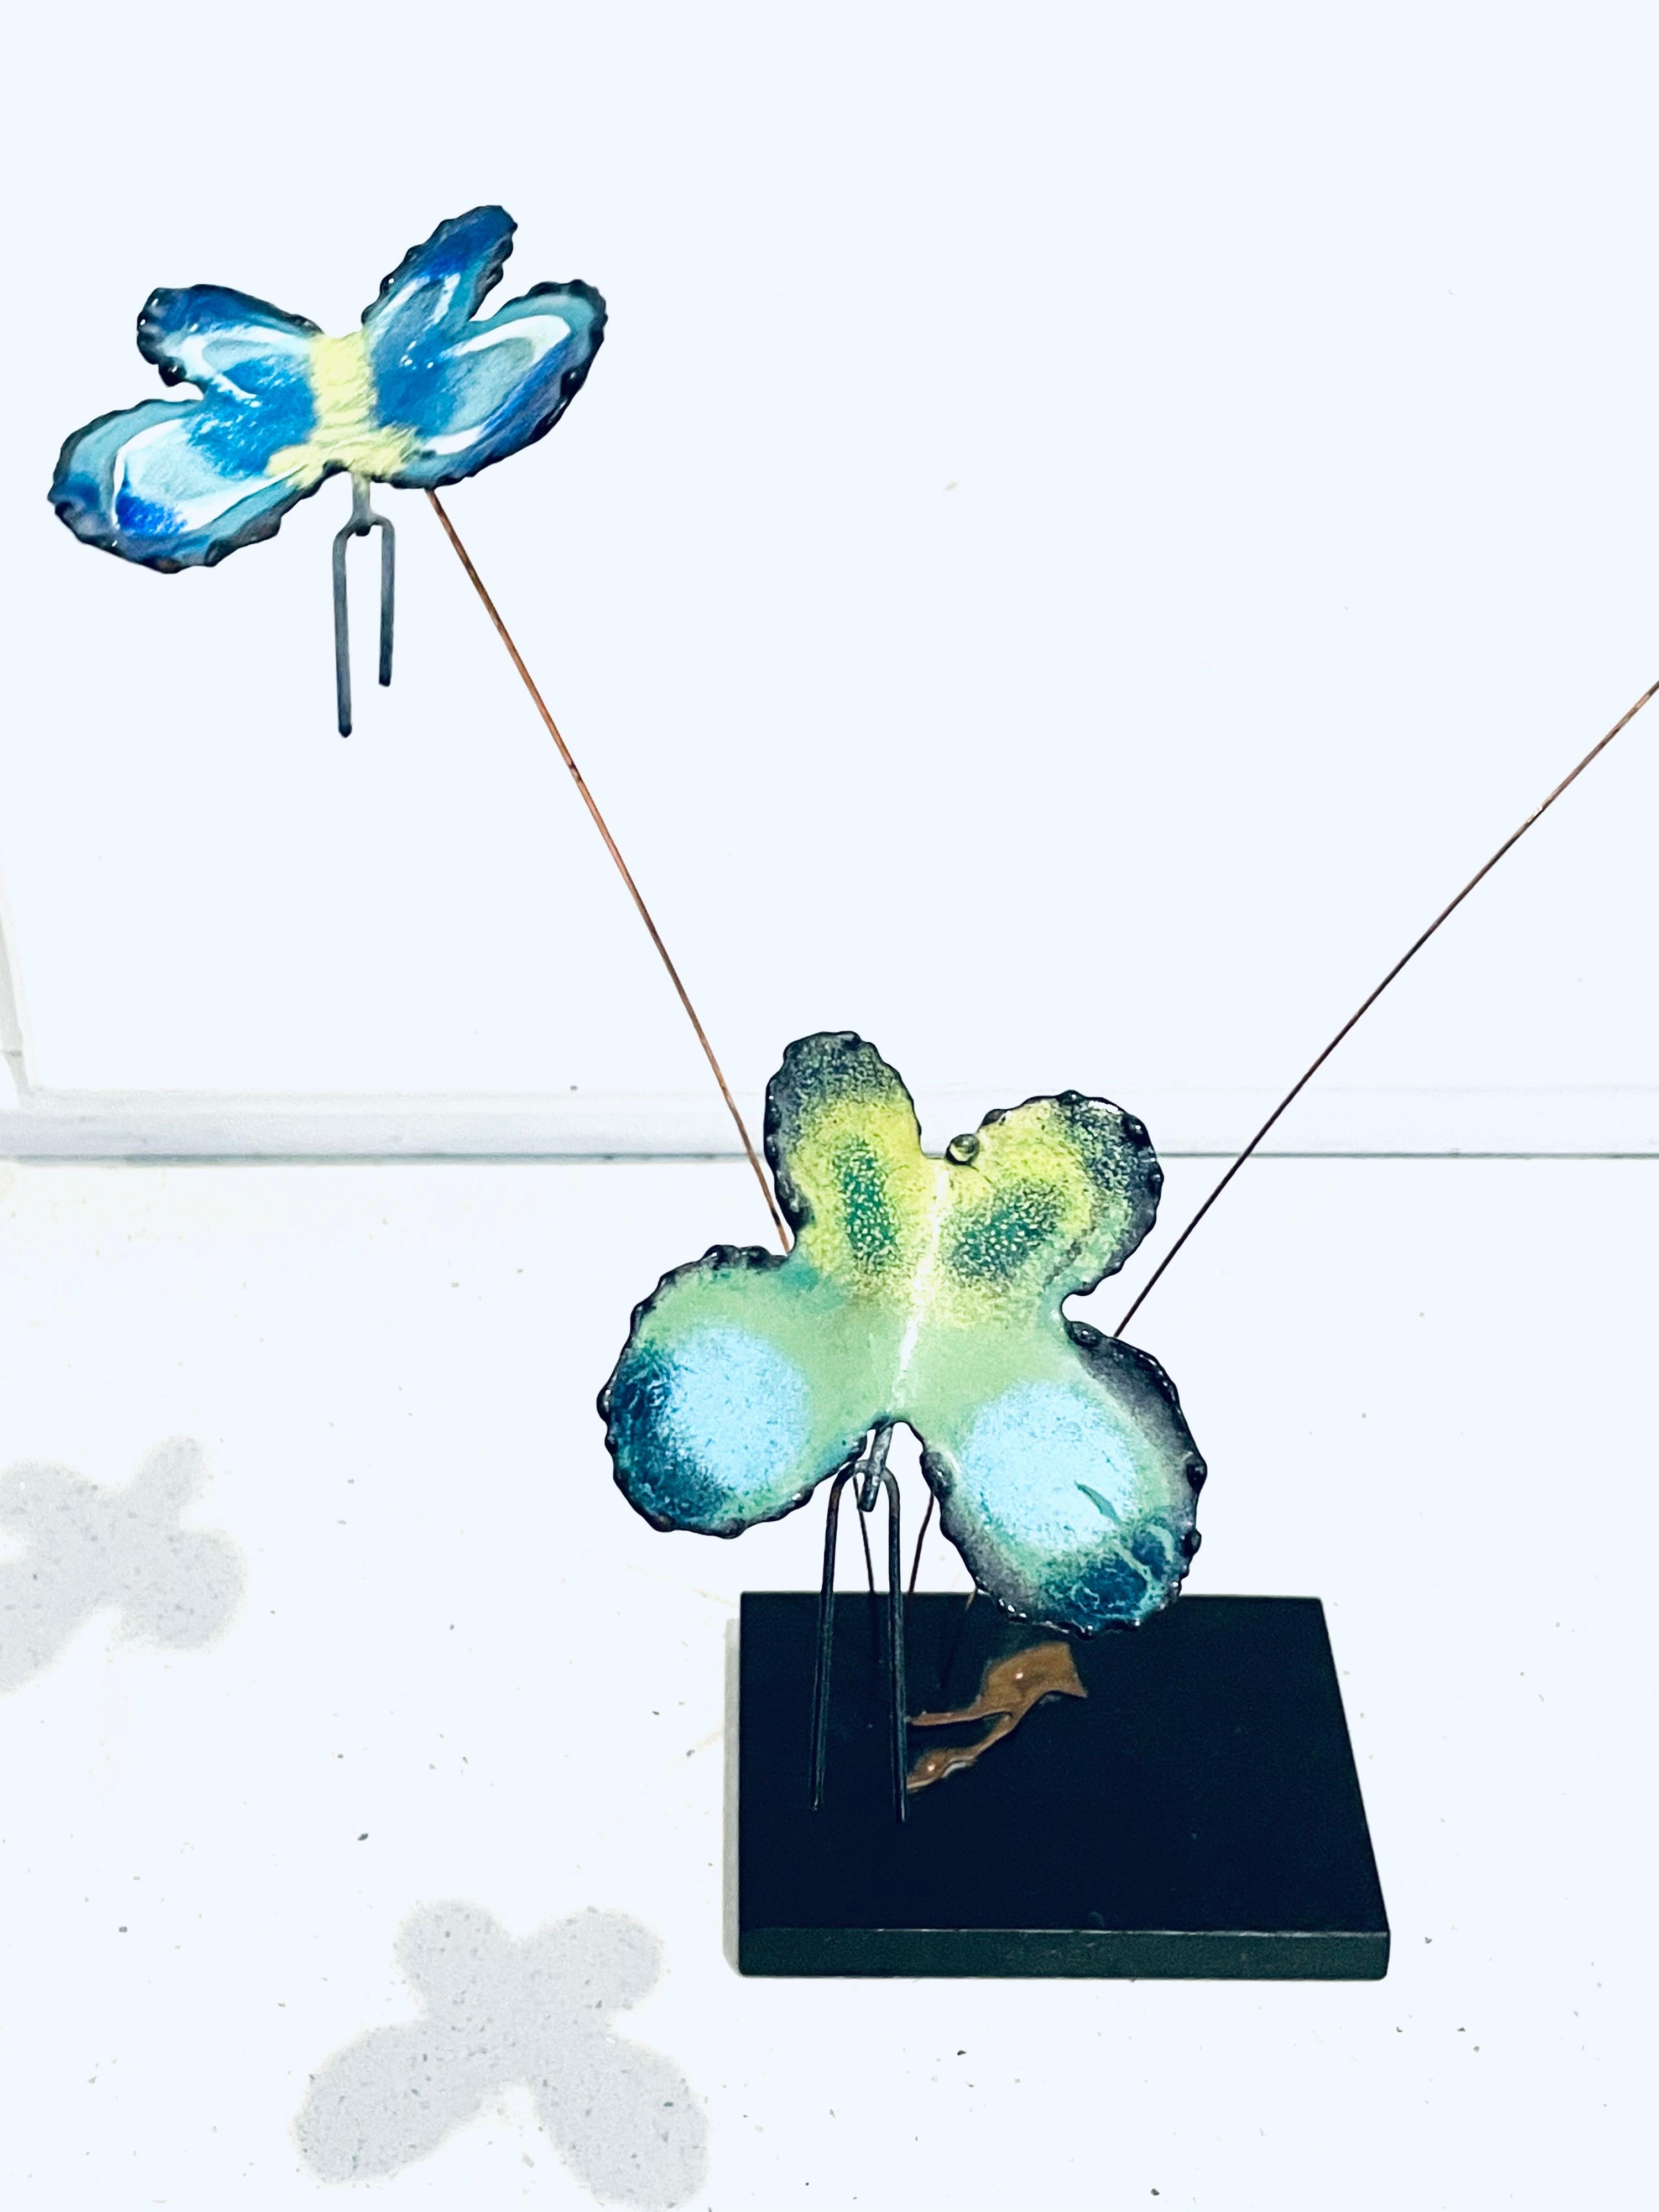 Whimsical butterflies Kinetic sculpture in enameled copper by Curtis Jere, not signed but we had this item before the butterflies move and come off a black painted wood base for easy shipping.